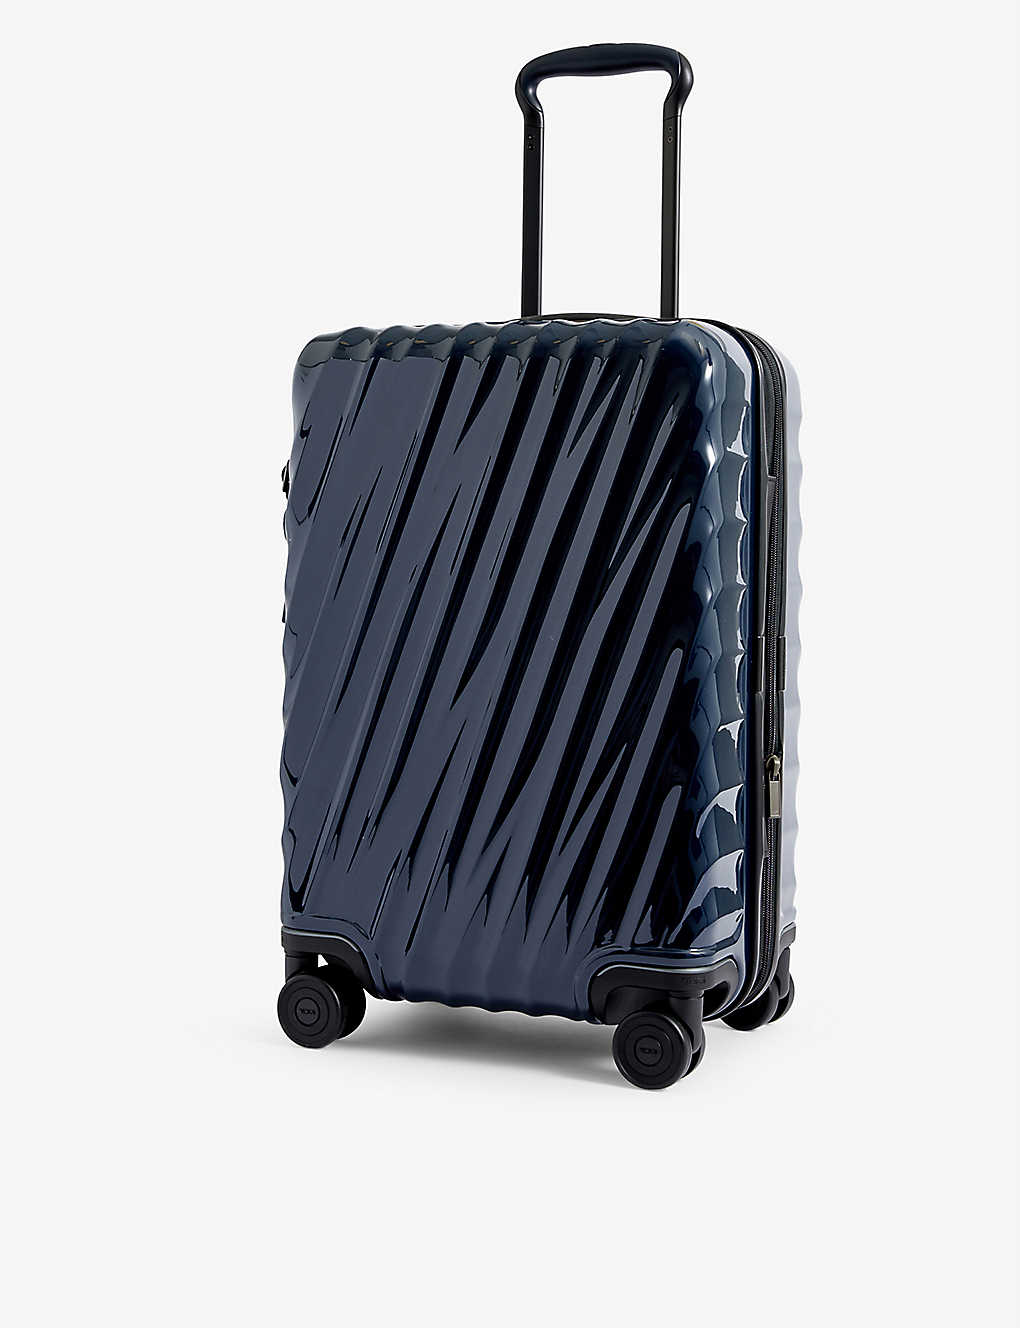 Tumi International Expandable Carry-on Four-wheeled Suitcase In Navy